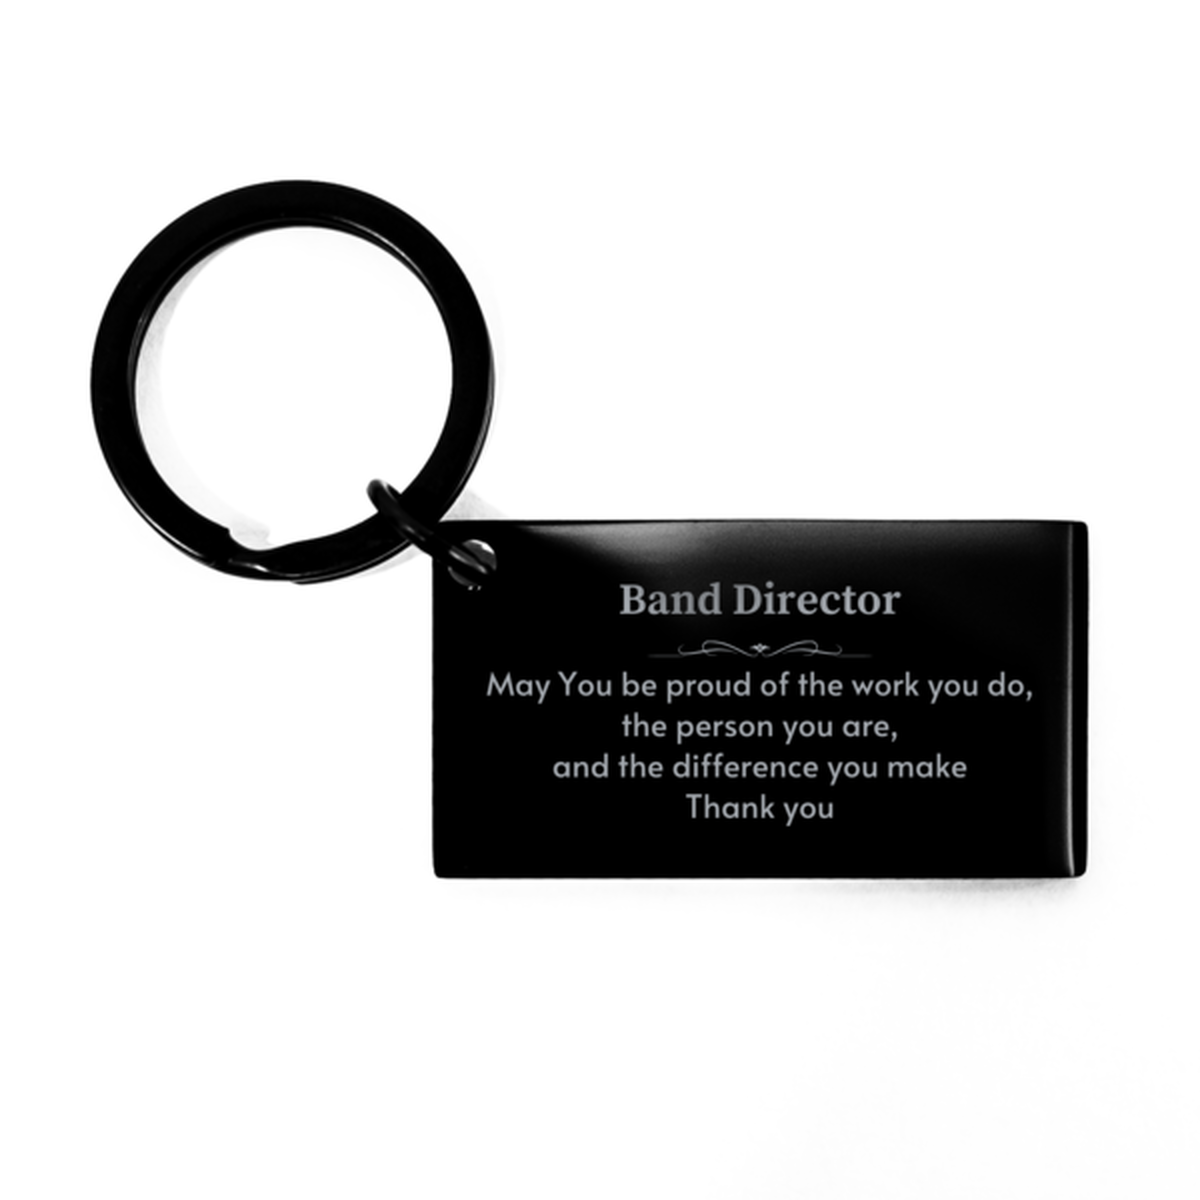 Heartwarming Keychain Retirement Coworkers Gifts for Band Director, CPA May You be proud of the work you do, the person you are Gifts for Boss Men Women Friends